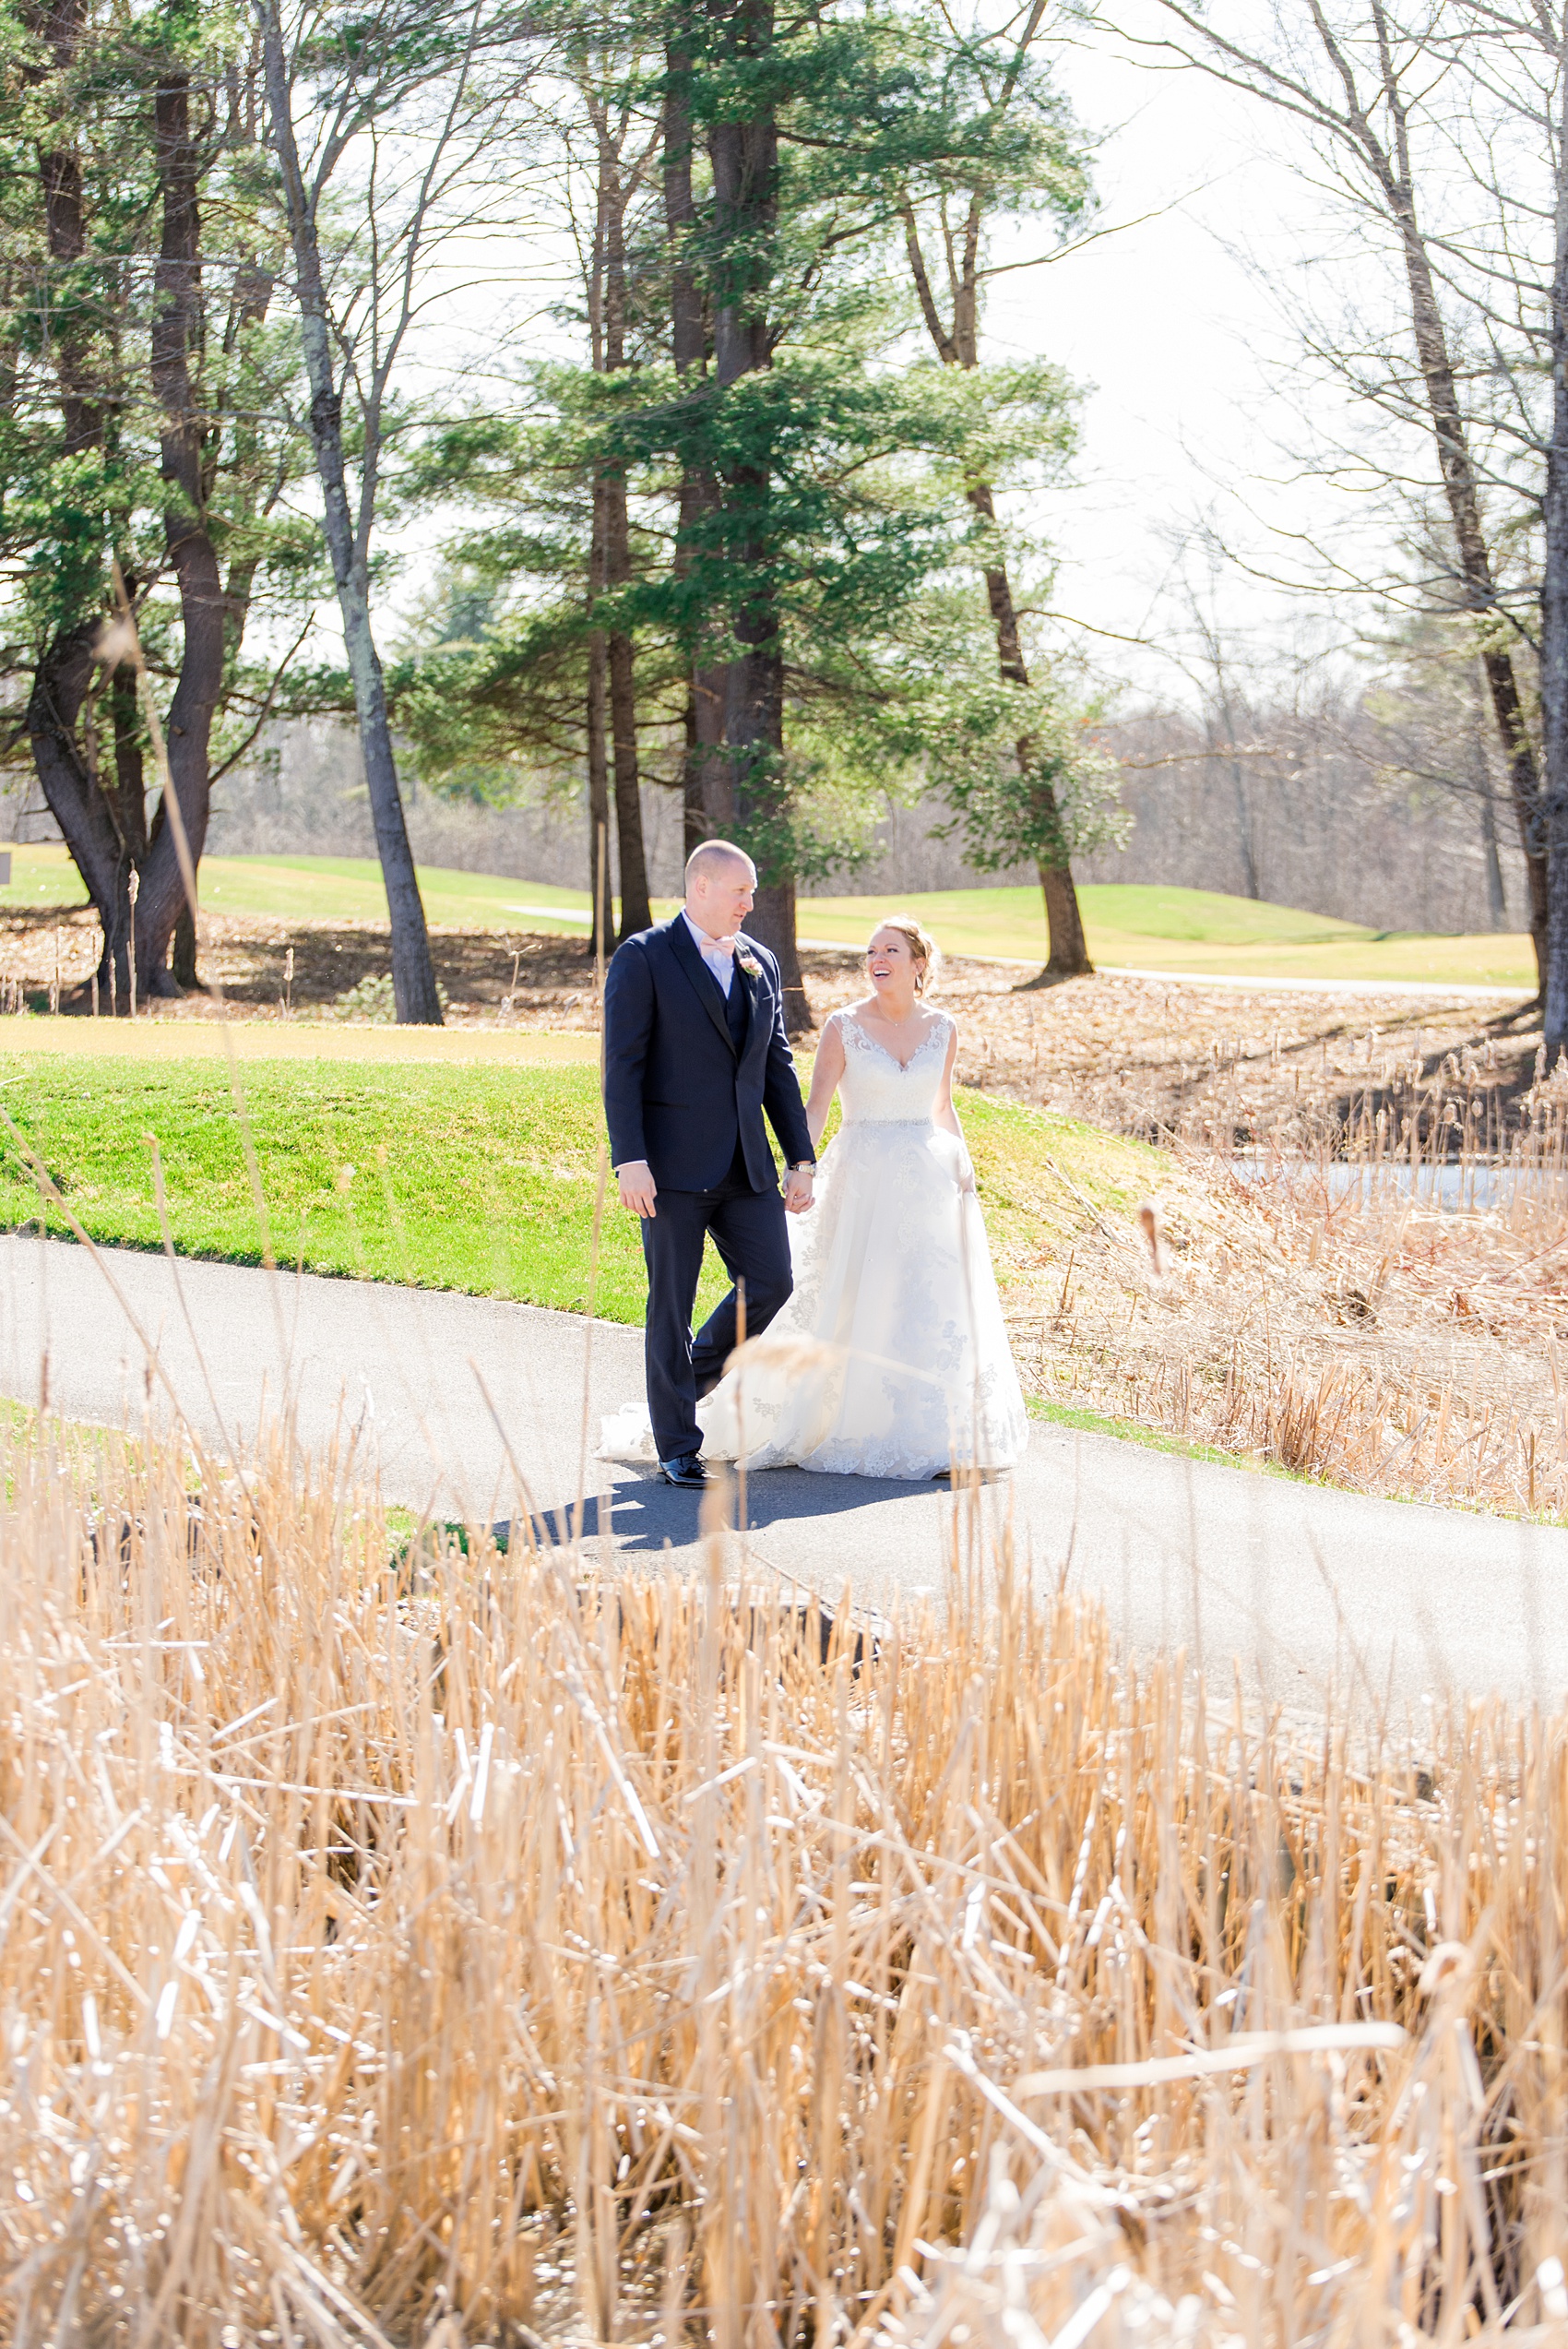 Photos from Saratoga Springs, New York by Mikkel Paige Photography. This picture shows the bride and groom walking on the golf course during their spring wedding. #SaratogaSprings #golfcoursewedding #SaratogaSpringsNY #SpringWedding 